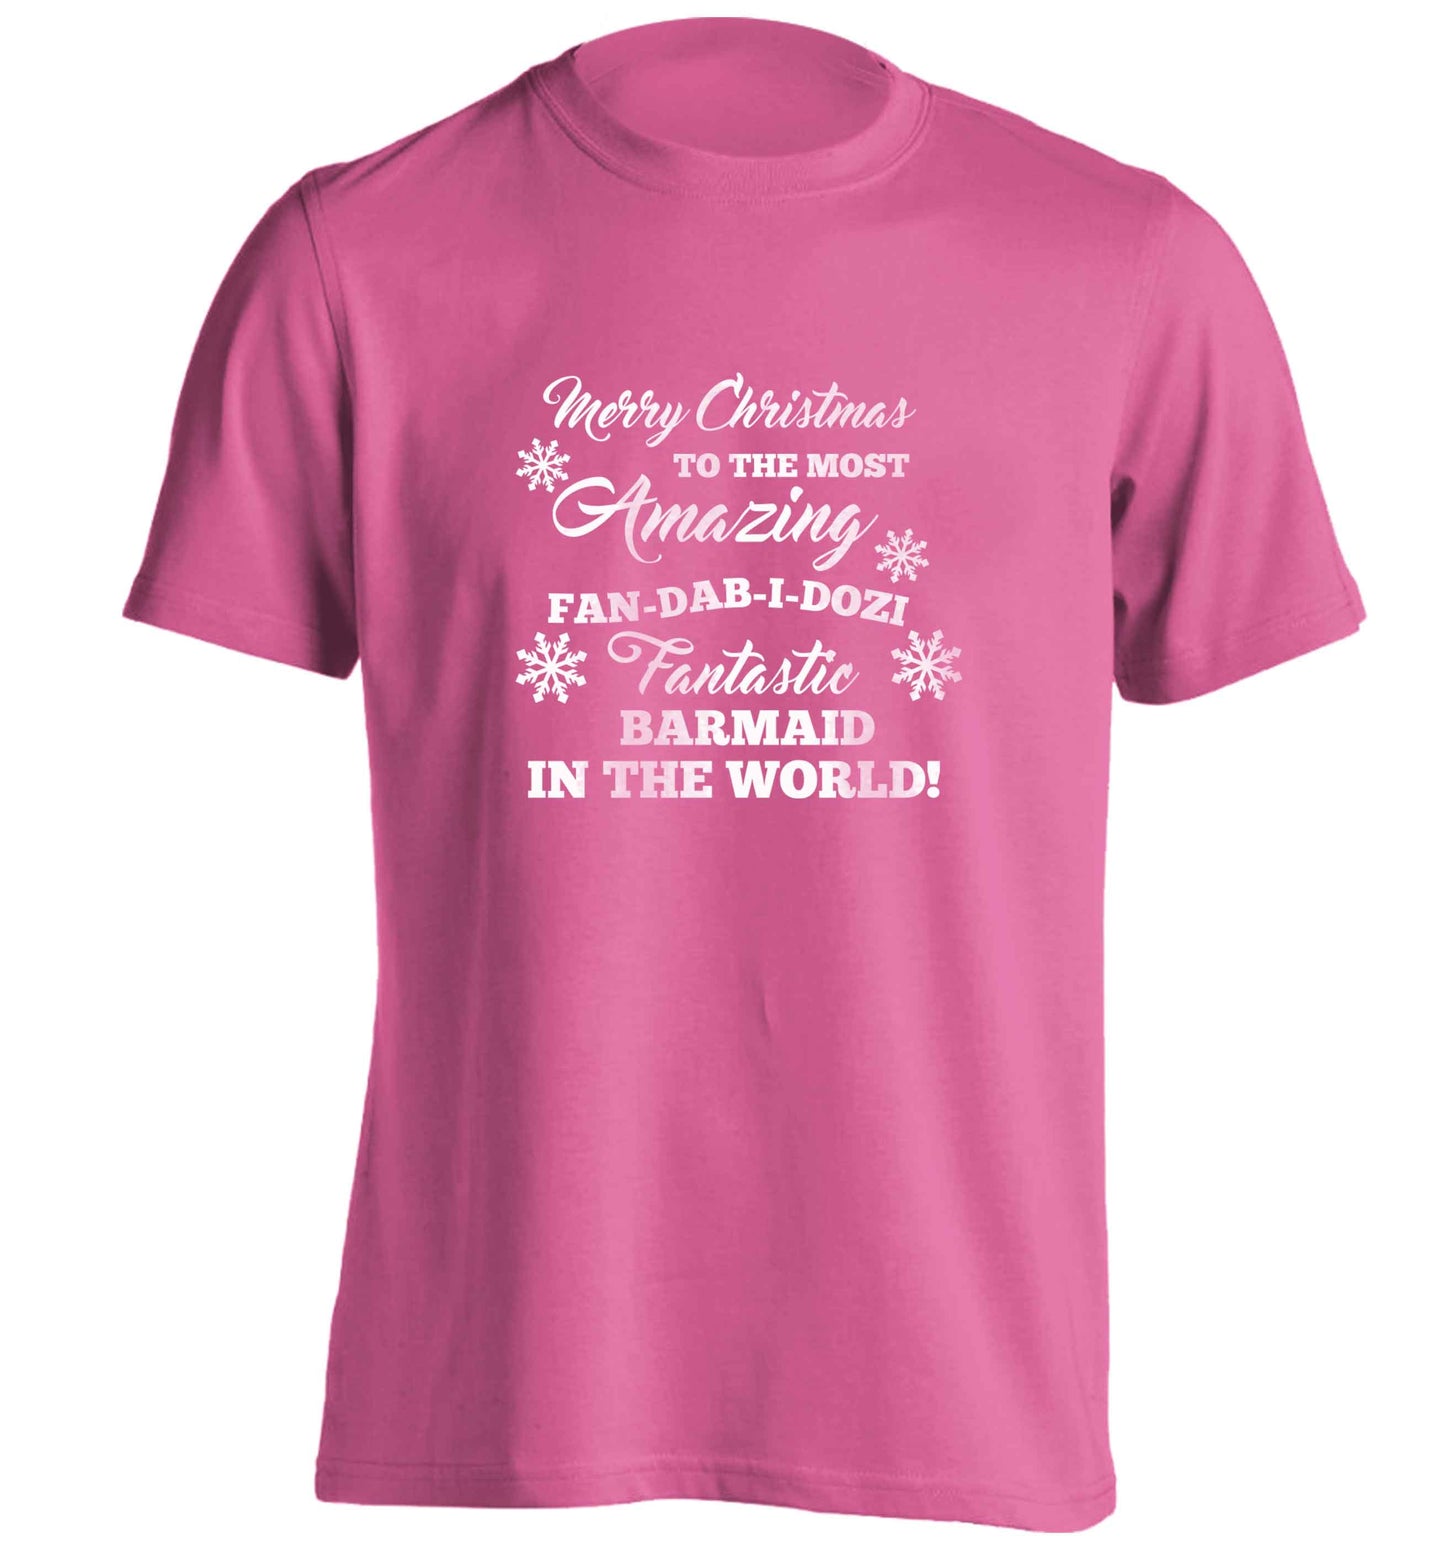 Merry Christmas to the most amazing barmaid in the world! adults unisex pink Tshirt 2XL